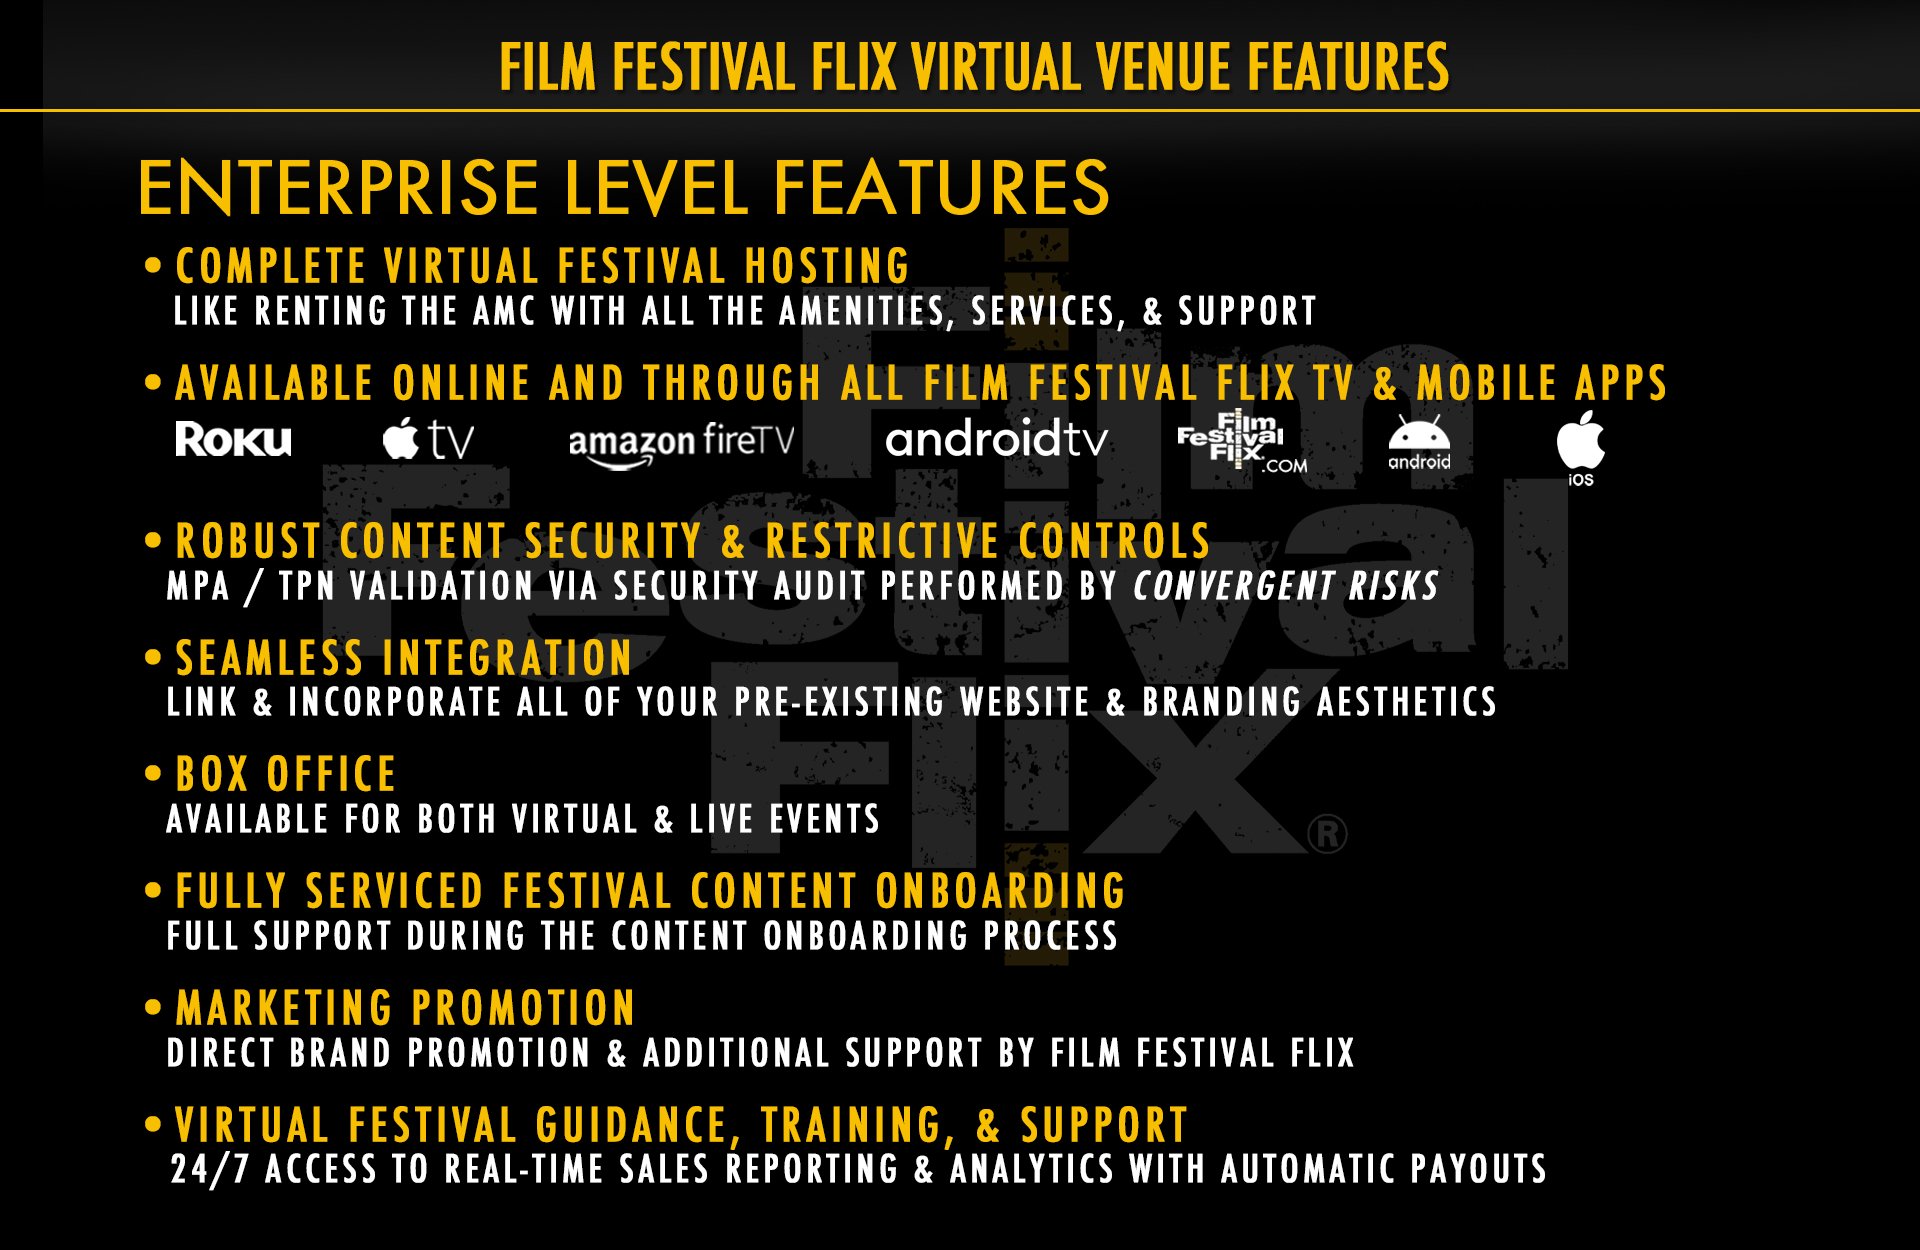 We power your virtual events: Festivals, Award-Winning Tours, Private Events and Year-round Streaming Channels on our secure platform while seamlessly integrating with your festival website. Since the COVID-19 pandemic, online film festivals have become a necessity for attendance to your events. Many organizations had to cancel in person events while coming up with virtual screenings to support streaming films. Here at Film Festival Flix, we have helped numerous festivals create that opportunity, allowing them to gain a world wide audience, a true hurdle with the original approach. Now, filmmakers have their feature films safely seen by more people and have the chance to create a film community not bound by physical location. As a streaming service, we work with festivals and expert curators to provide both subscription and rental based on-demand streaming access to select, award-winning and critically acclaimed films. All available on our Website and our Film Festival Flix Streaming Apps - Apple TV, Roku, Android, Amazon Fire, IOS Mobile.